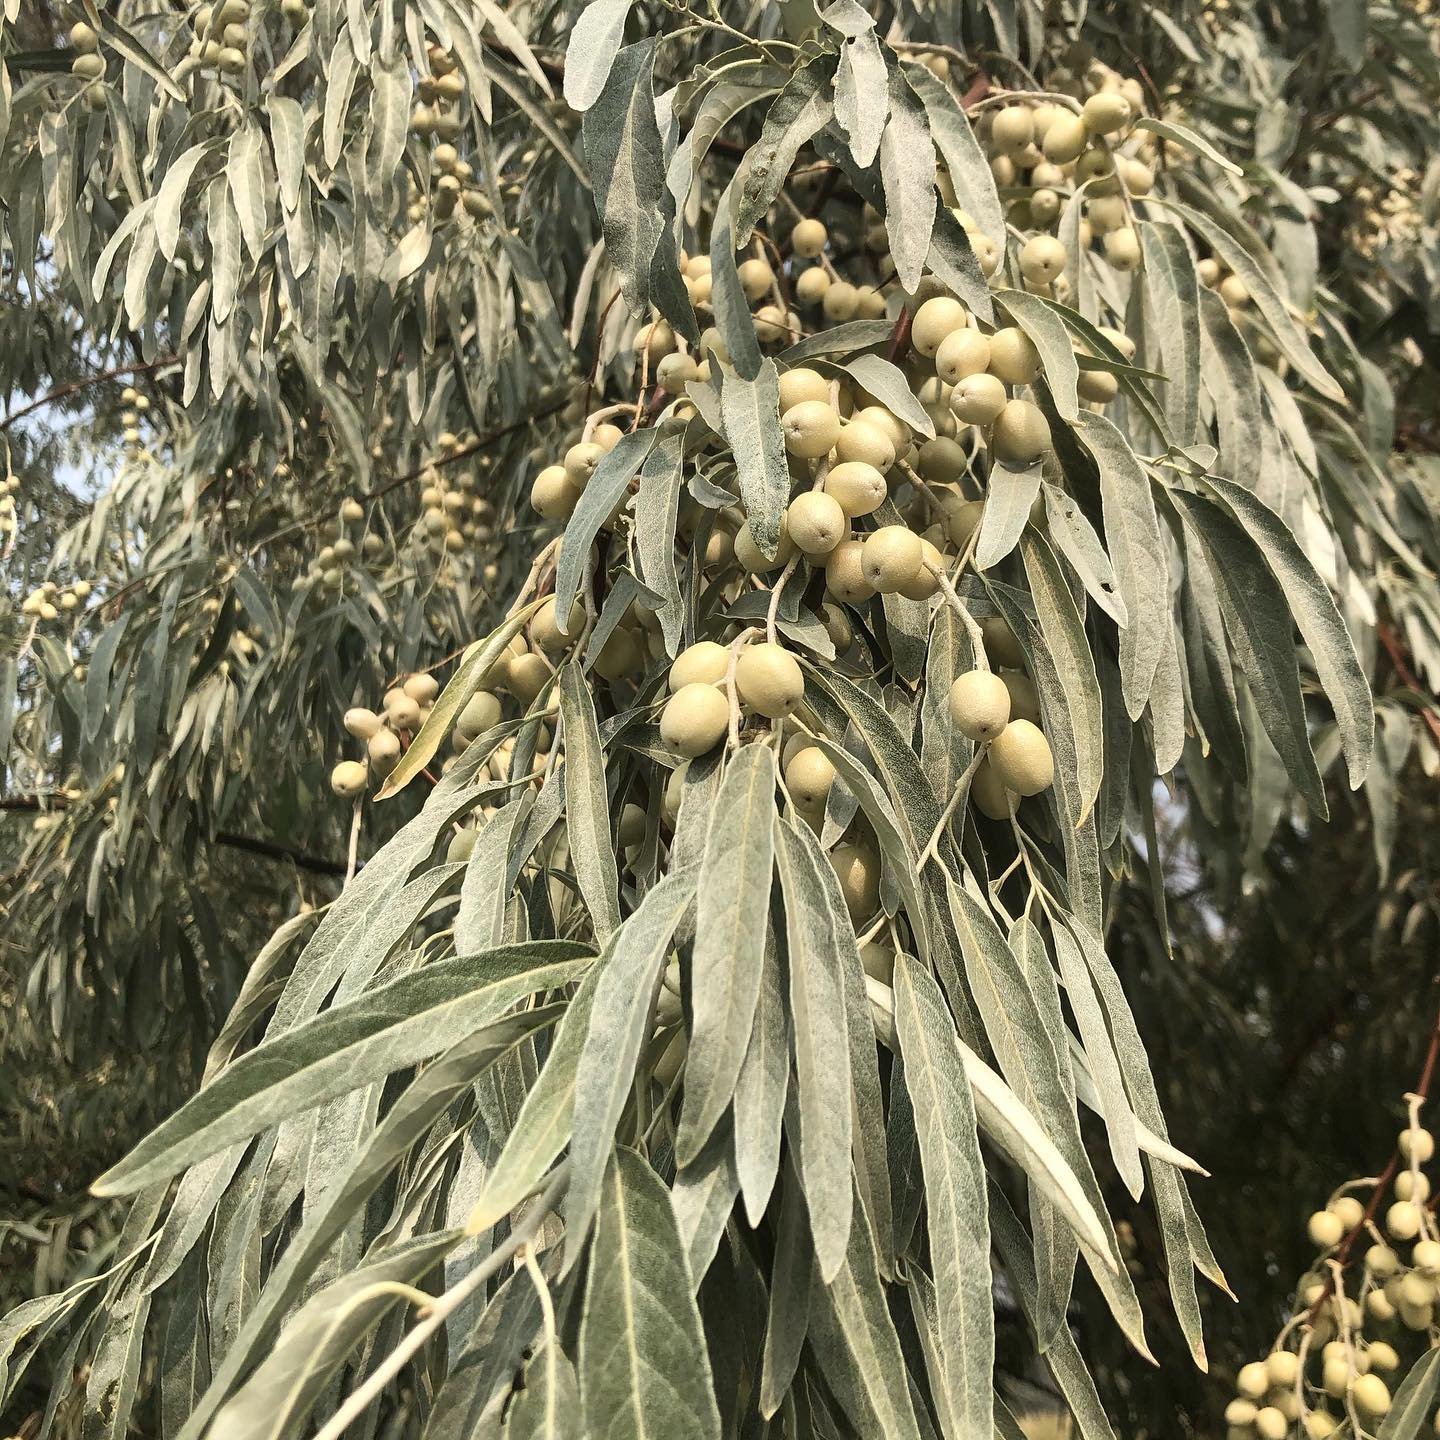 Our Russian Olives are in full bloom!